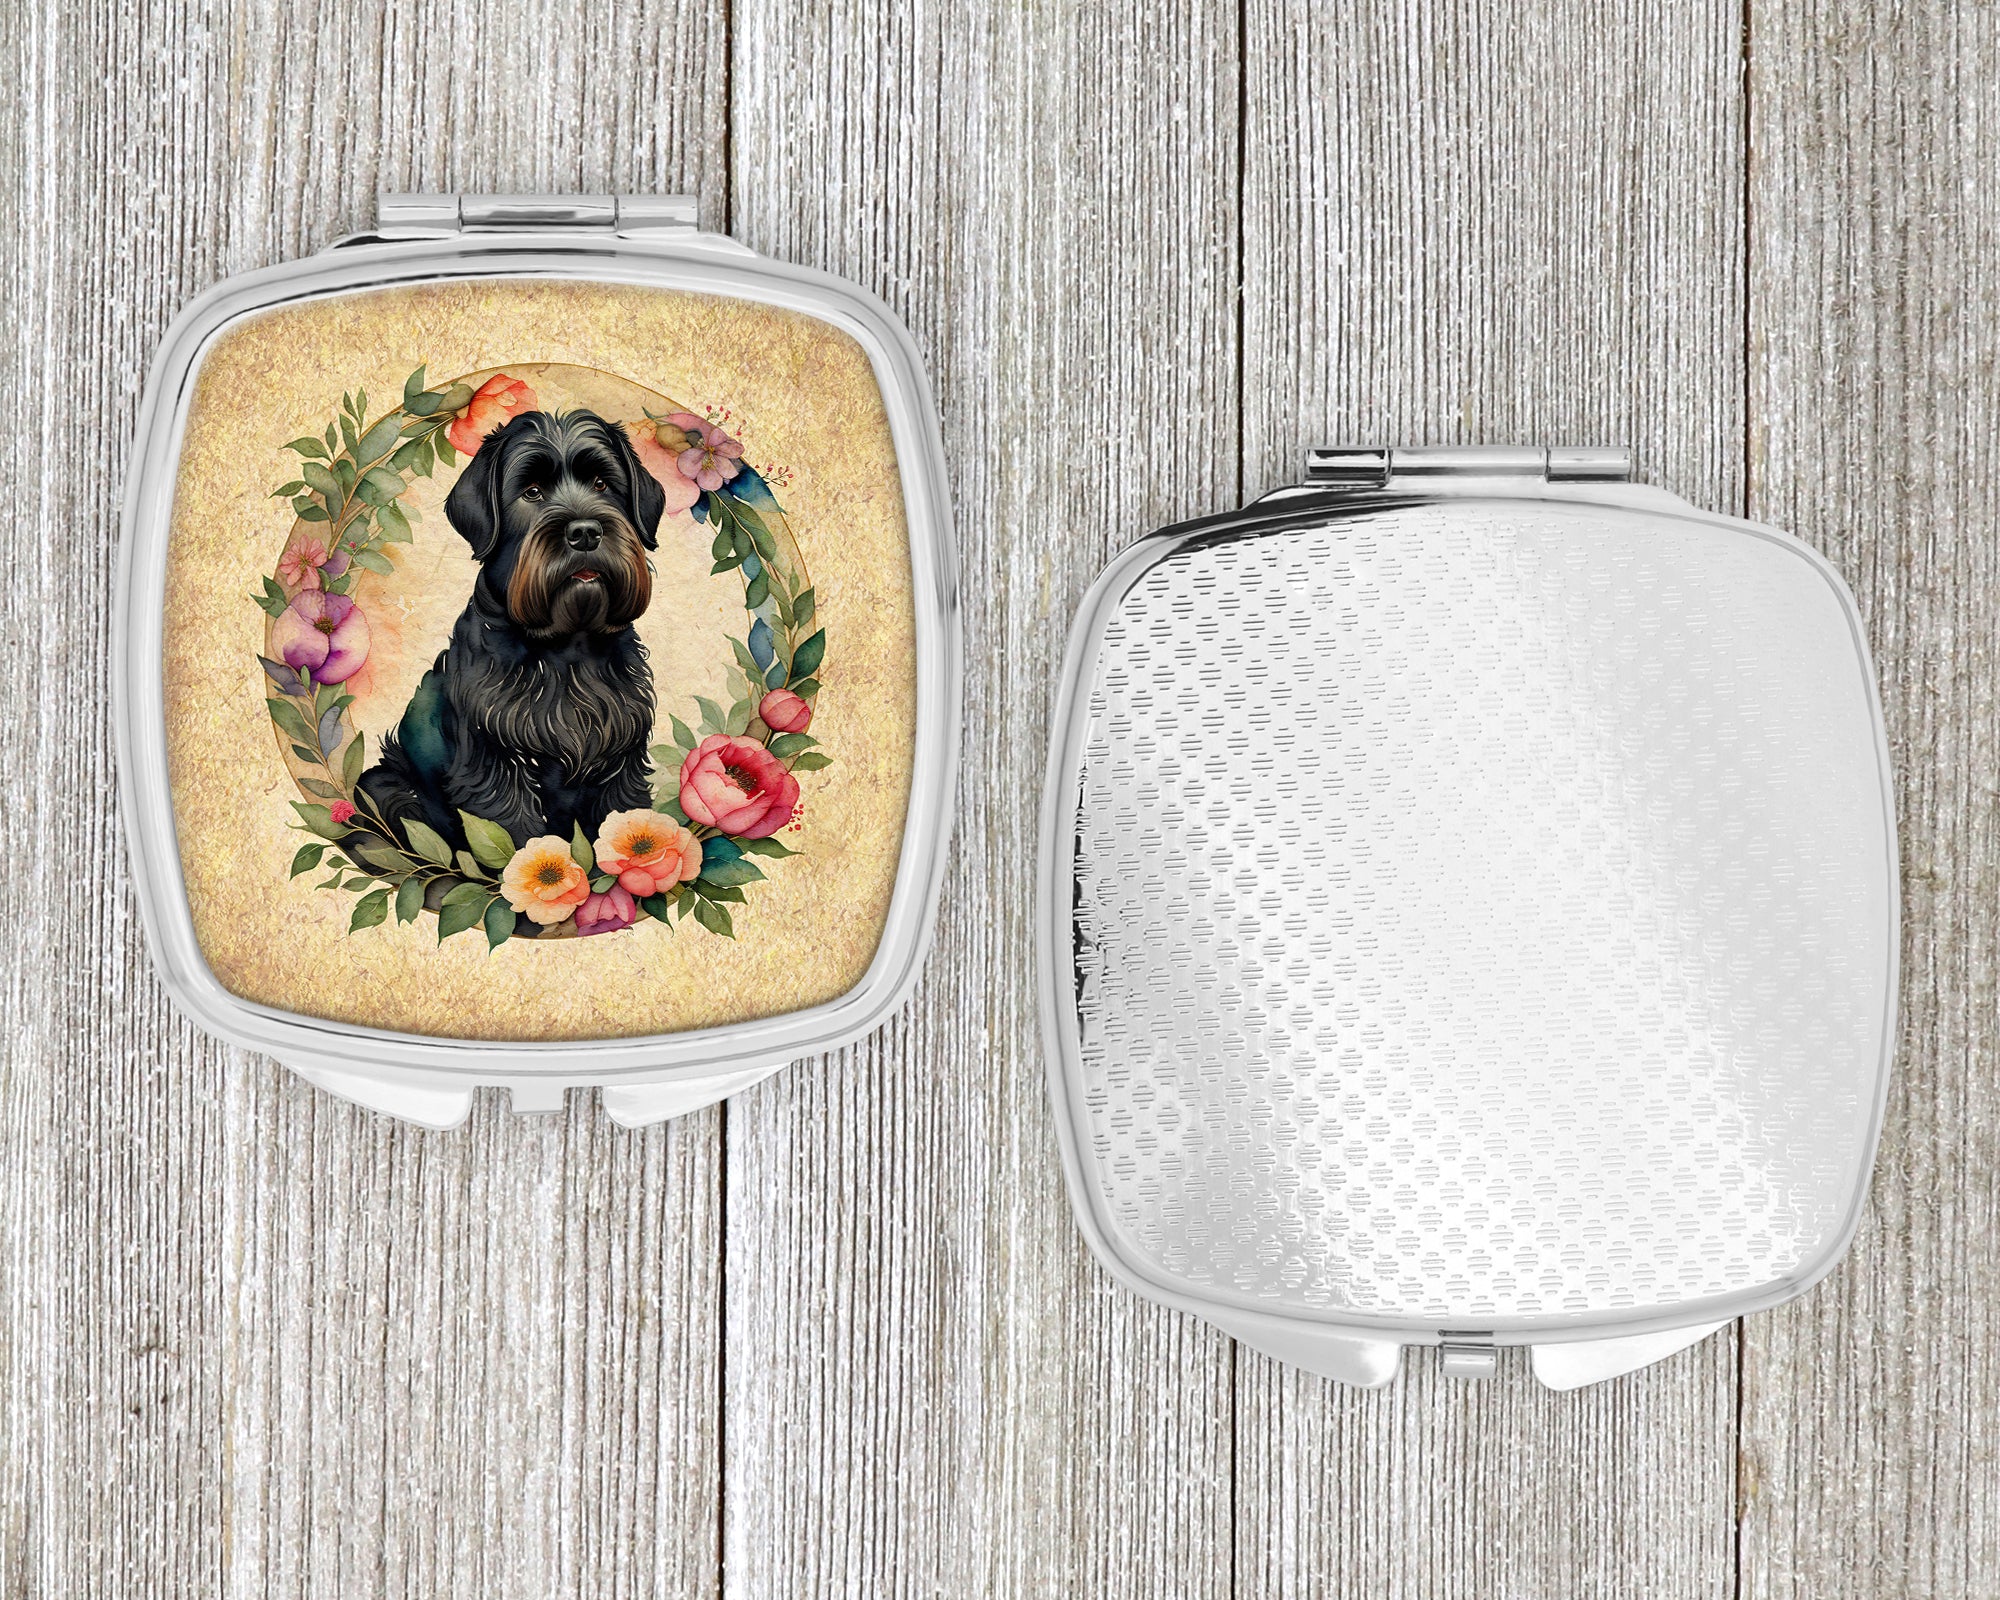 Black Russian Terrier and Flowers Compact Mirror